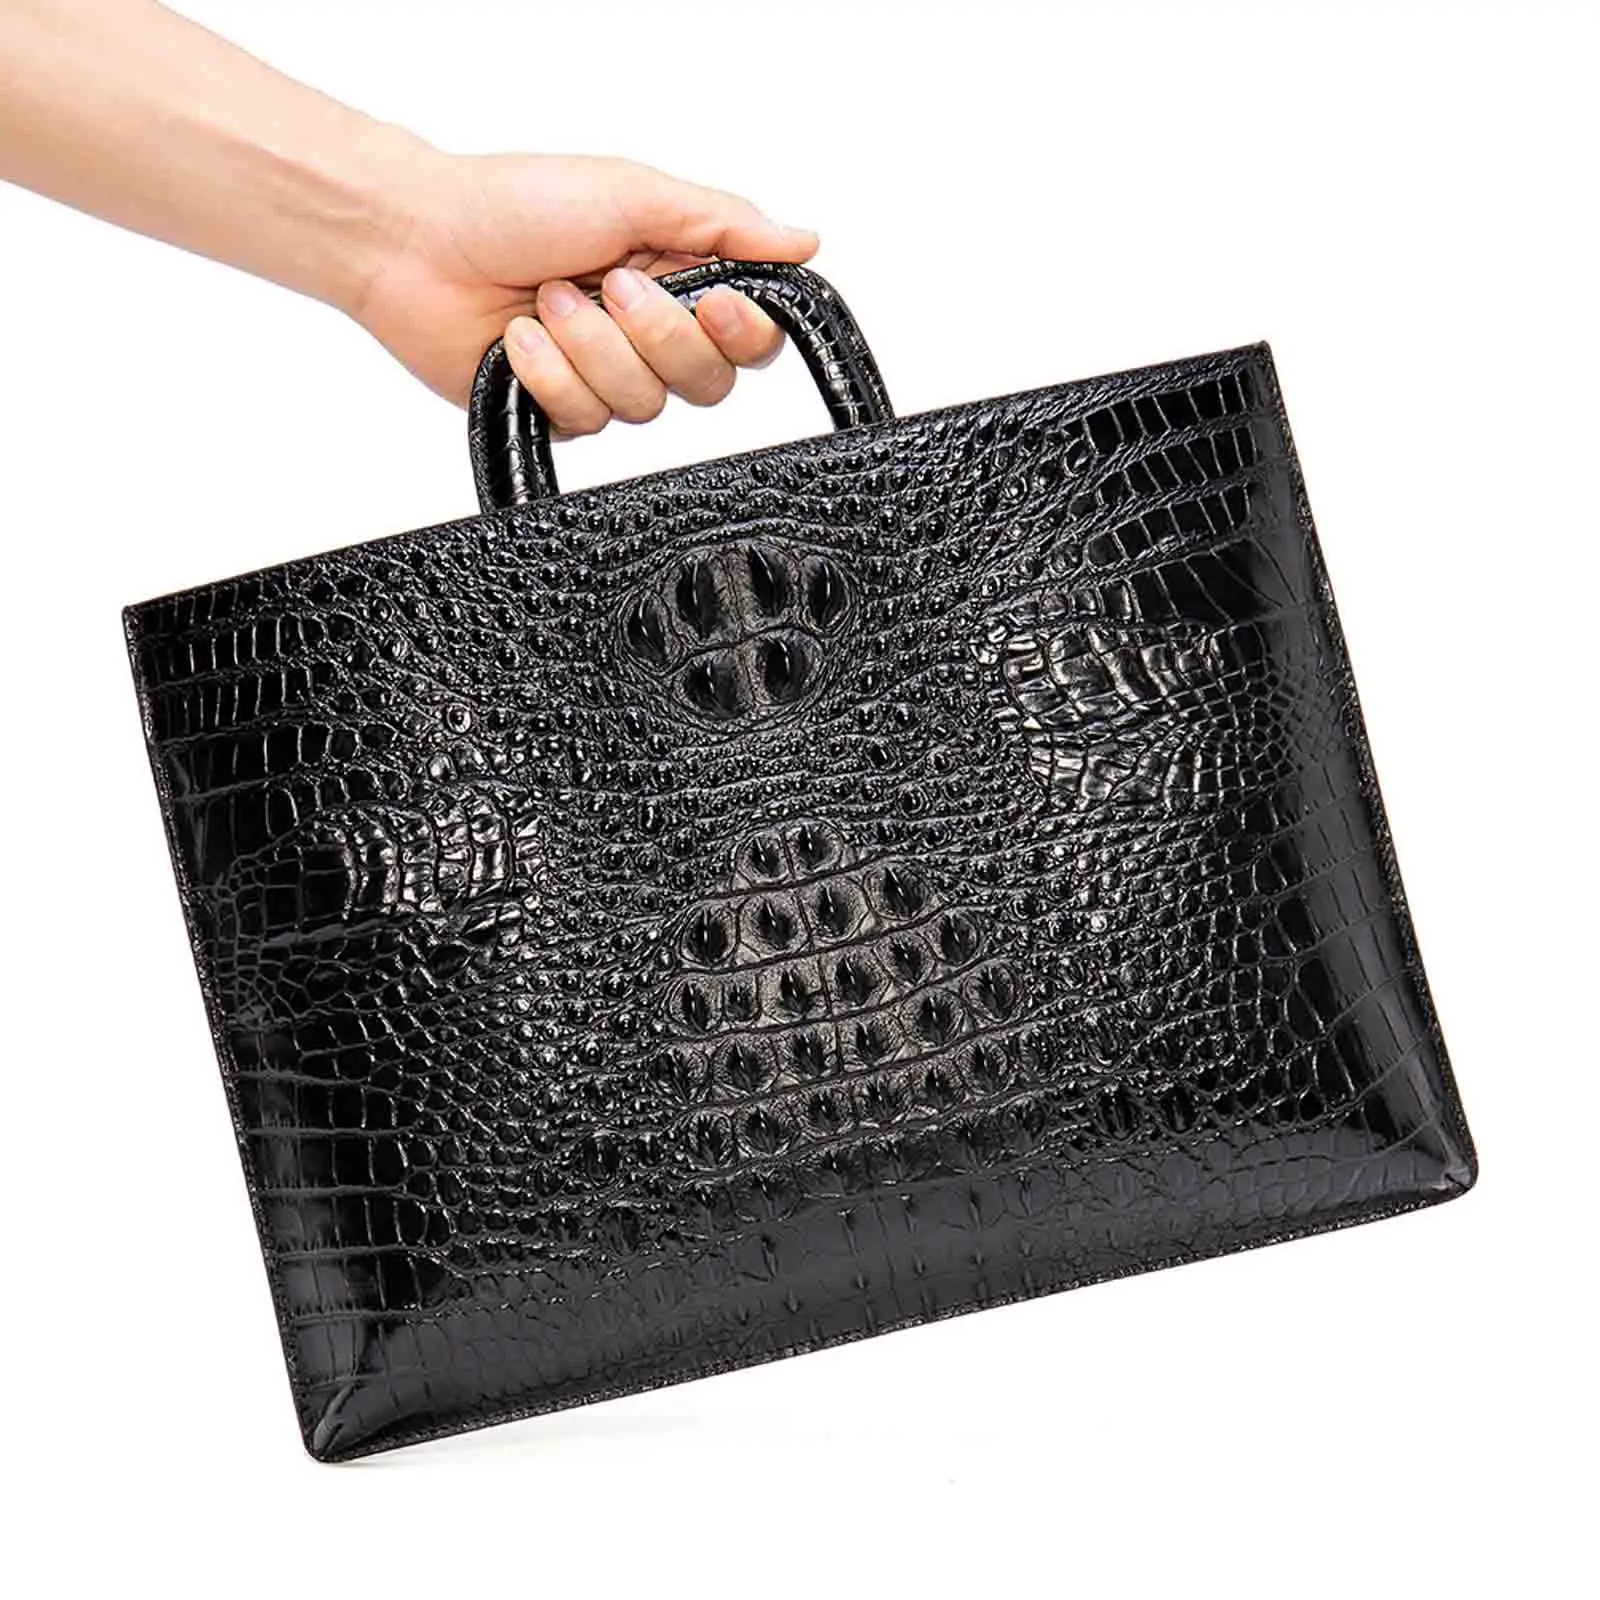 Motingsome Crocodile Bag Cowhide Briefcase Luxury Genuine Leather Business Shoulder Handbags and Purses Office Hand Bag 2022 New